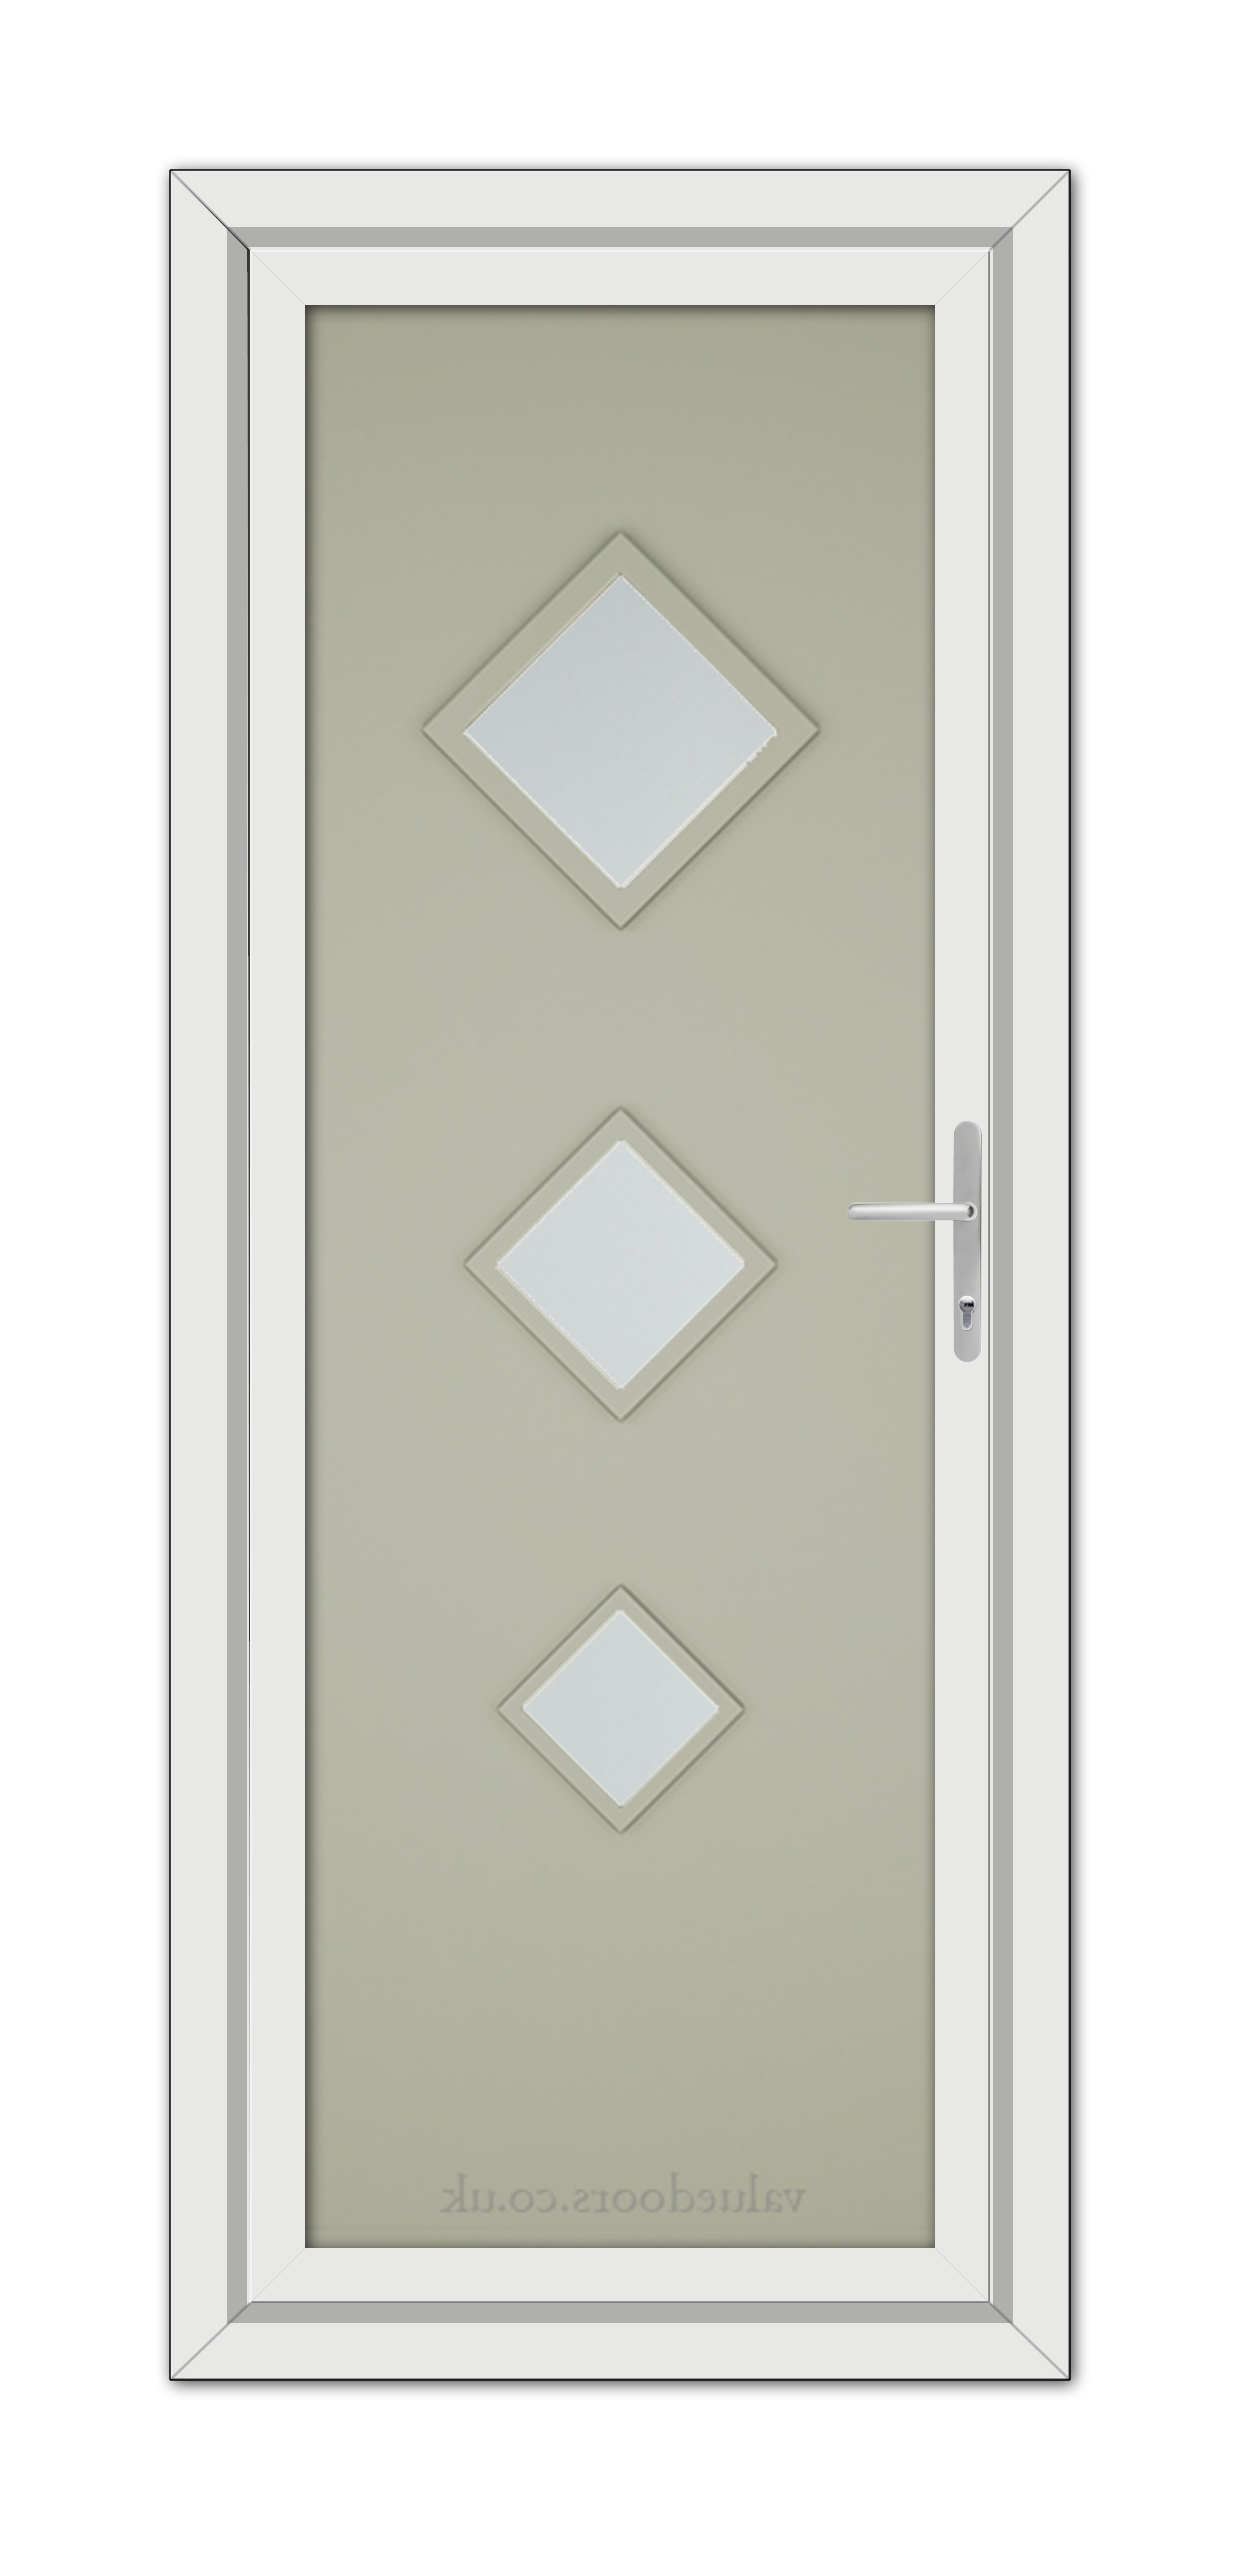 A vertical image of a closed Agate Grey Modern 5123 uPVC door with three diamond-shaped windows and a white handle, set in a white frame.